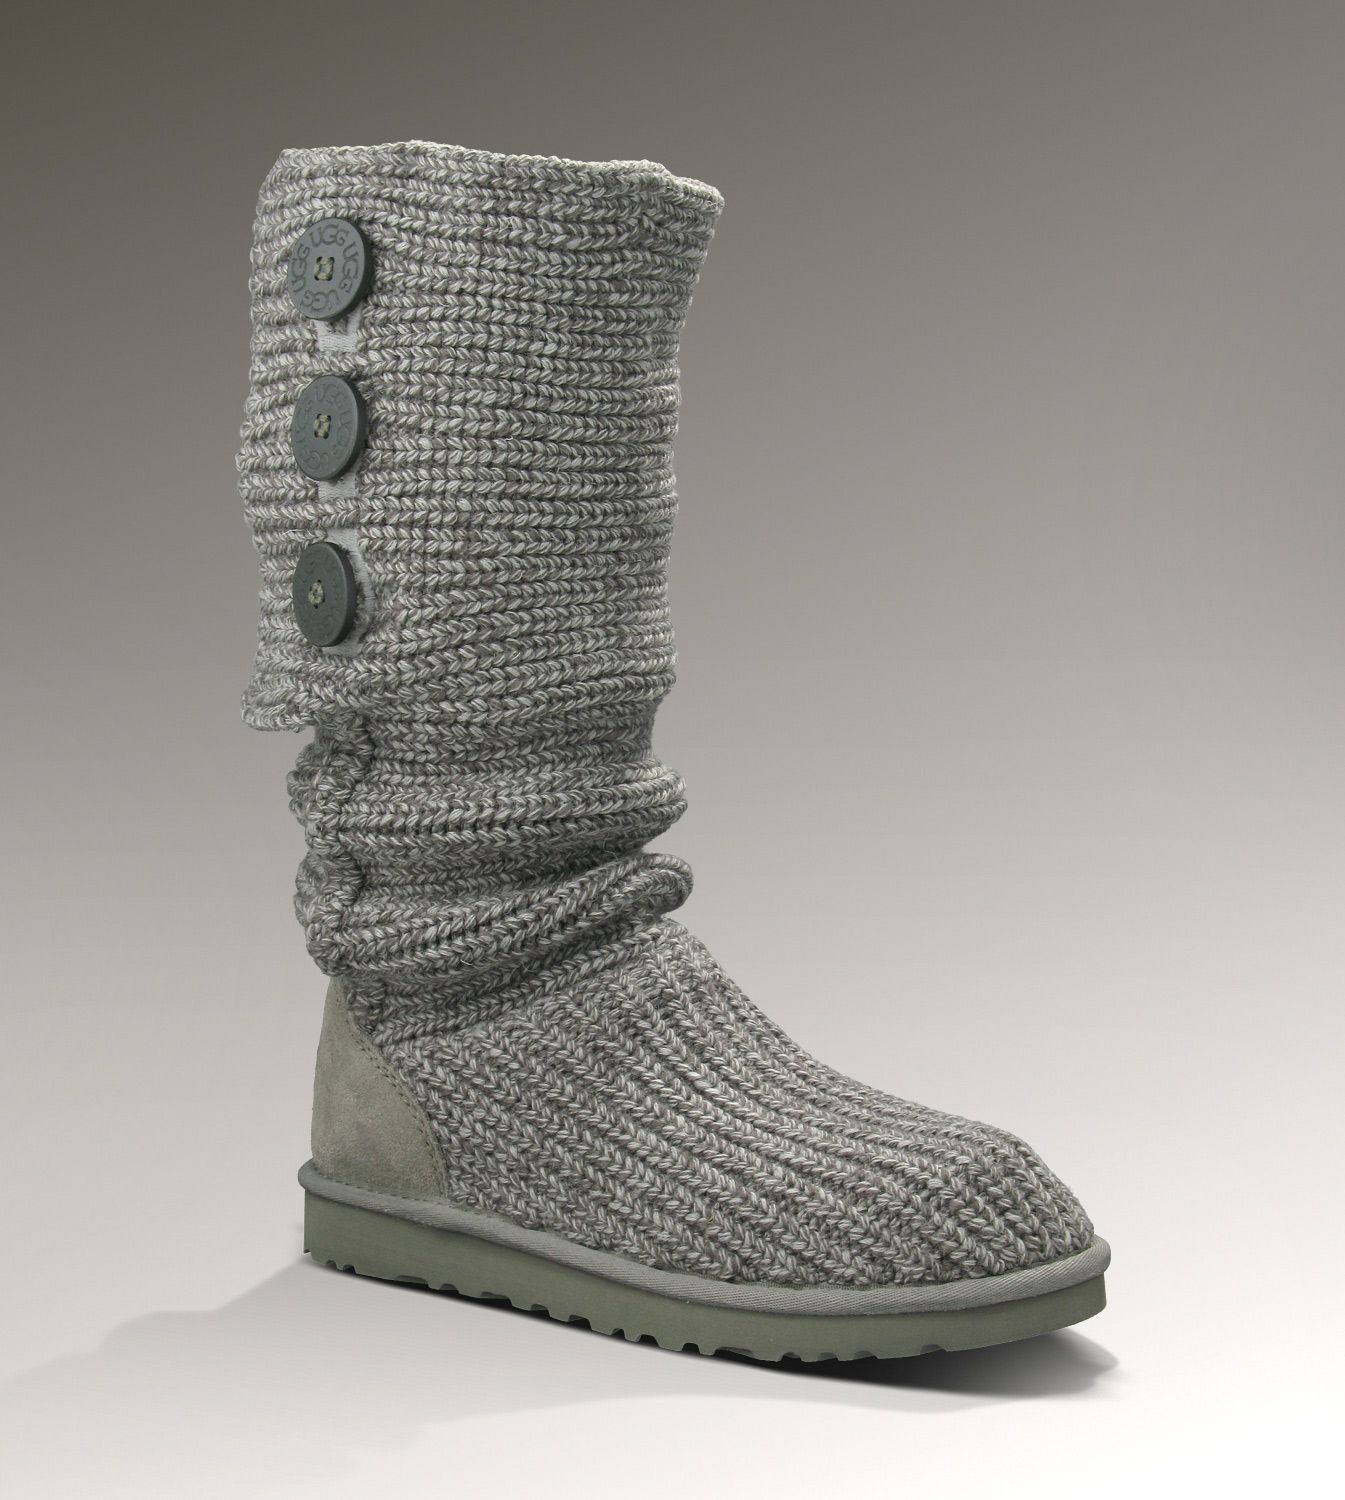 UGG Womens Classic Cardy Grey $105 : UGG Outlet, Cheap UGG Boots Outlet Online,